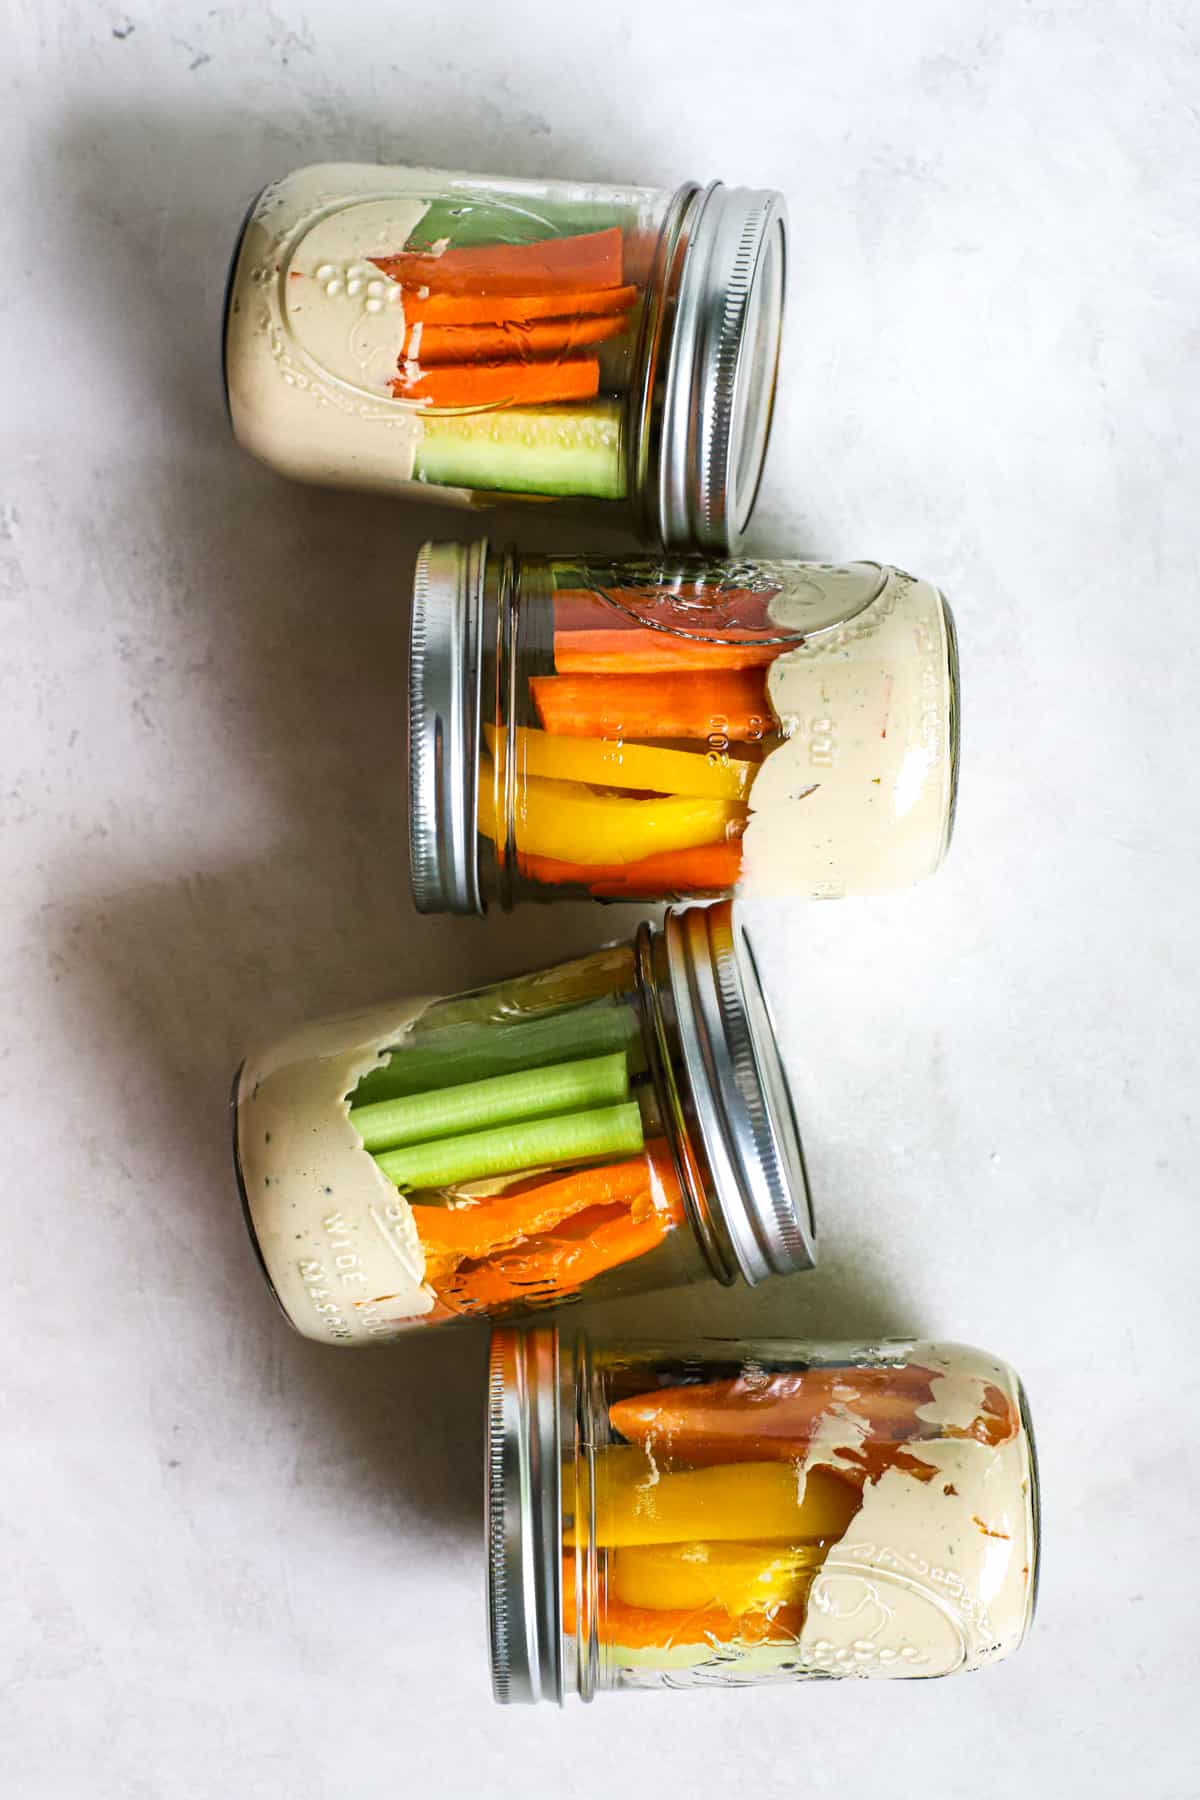 Four hummus and veggie jars lying on sides, on gray and white surface